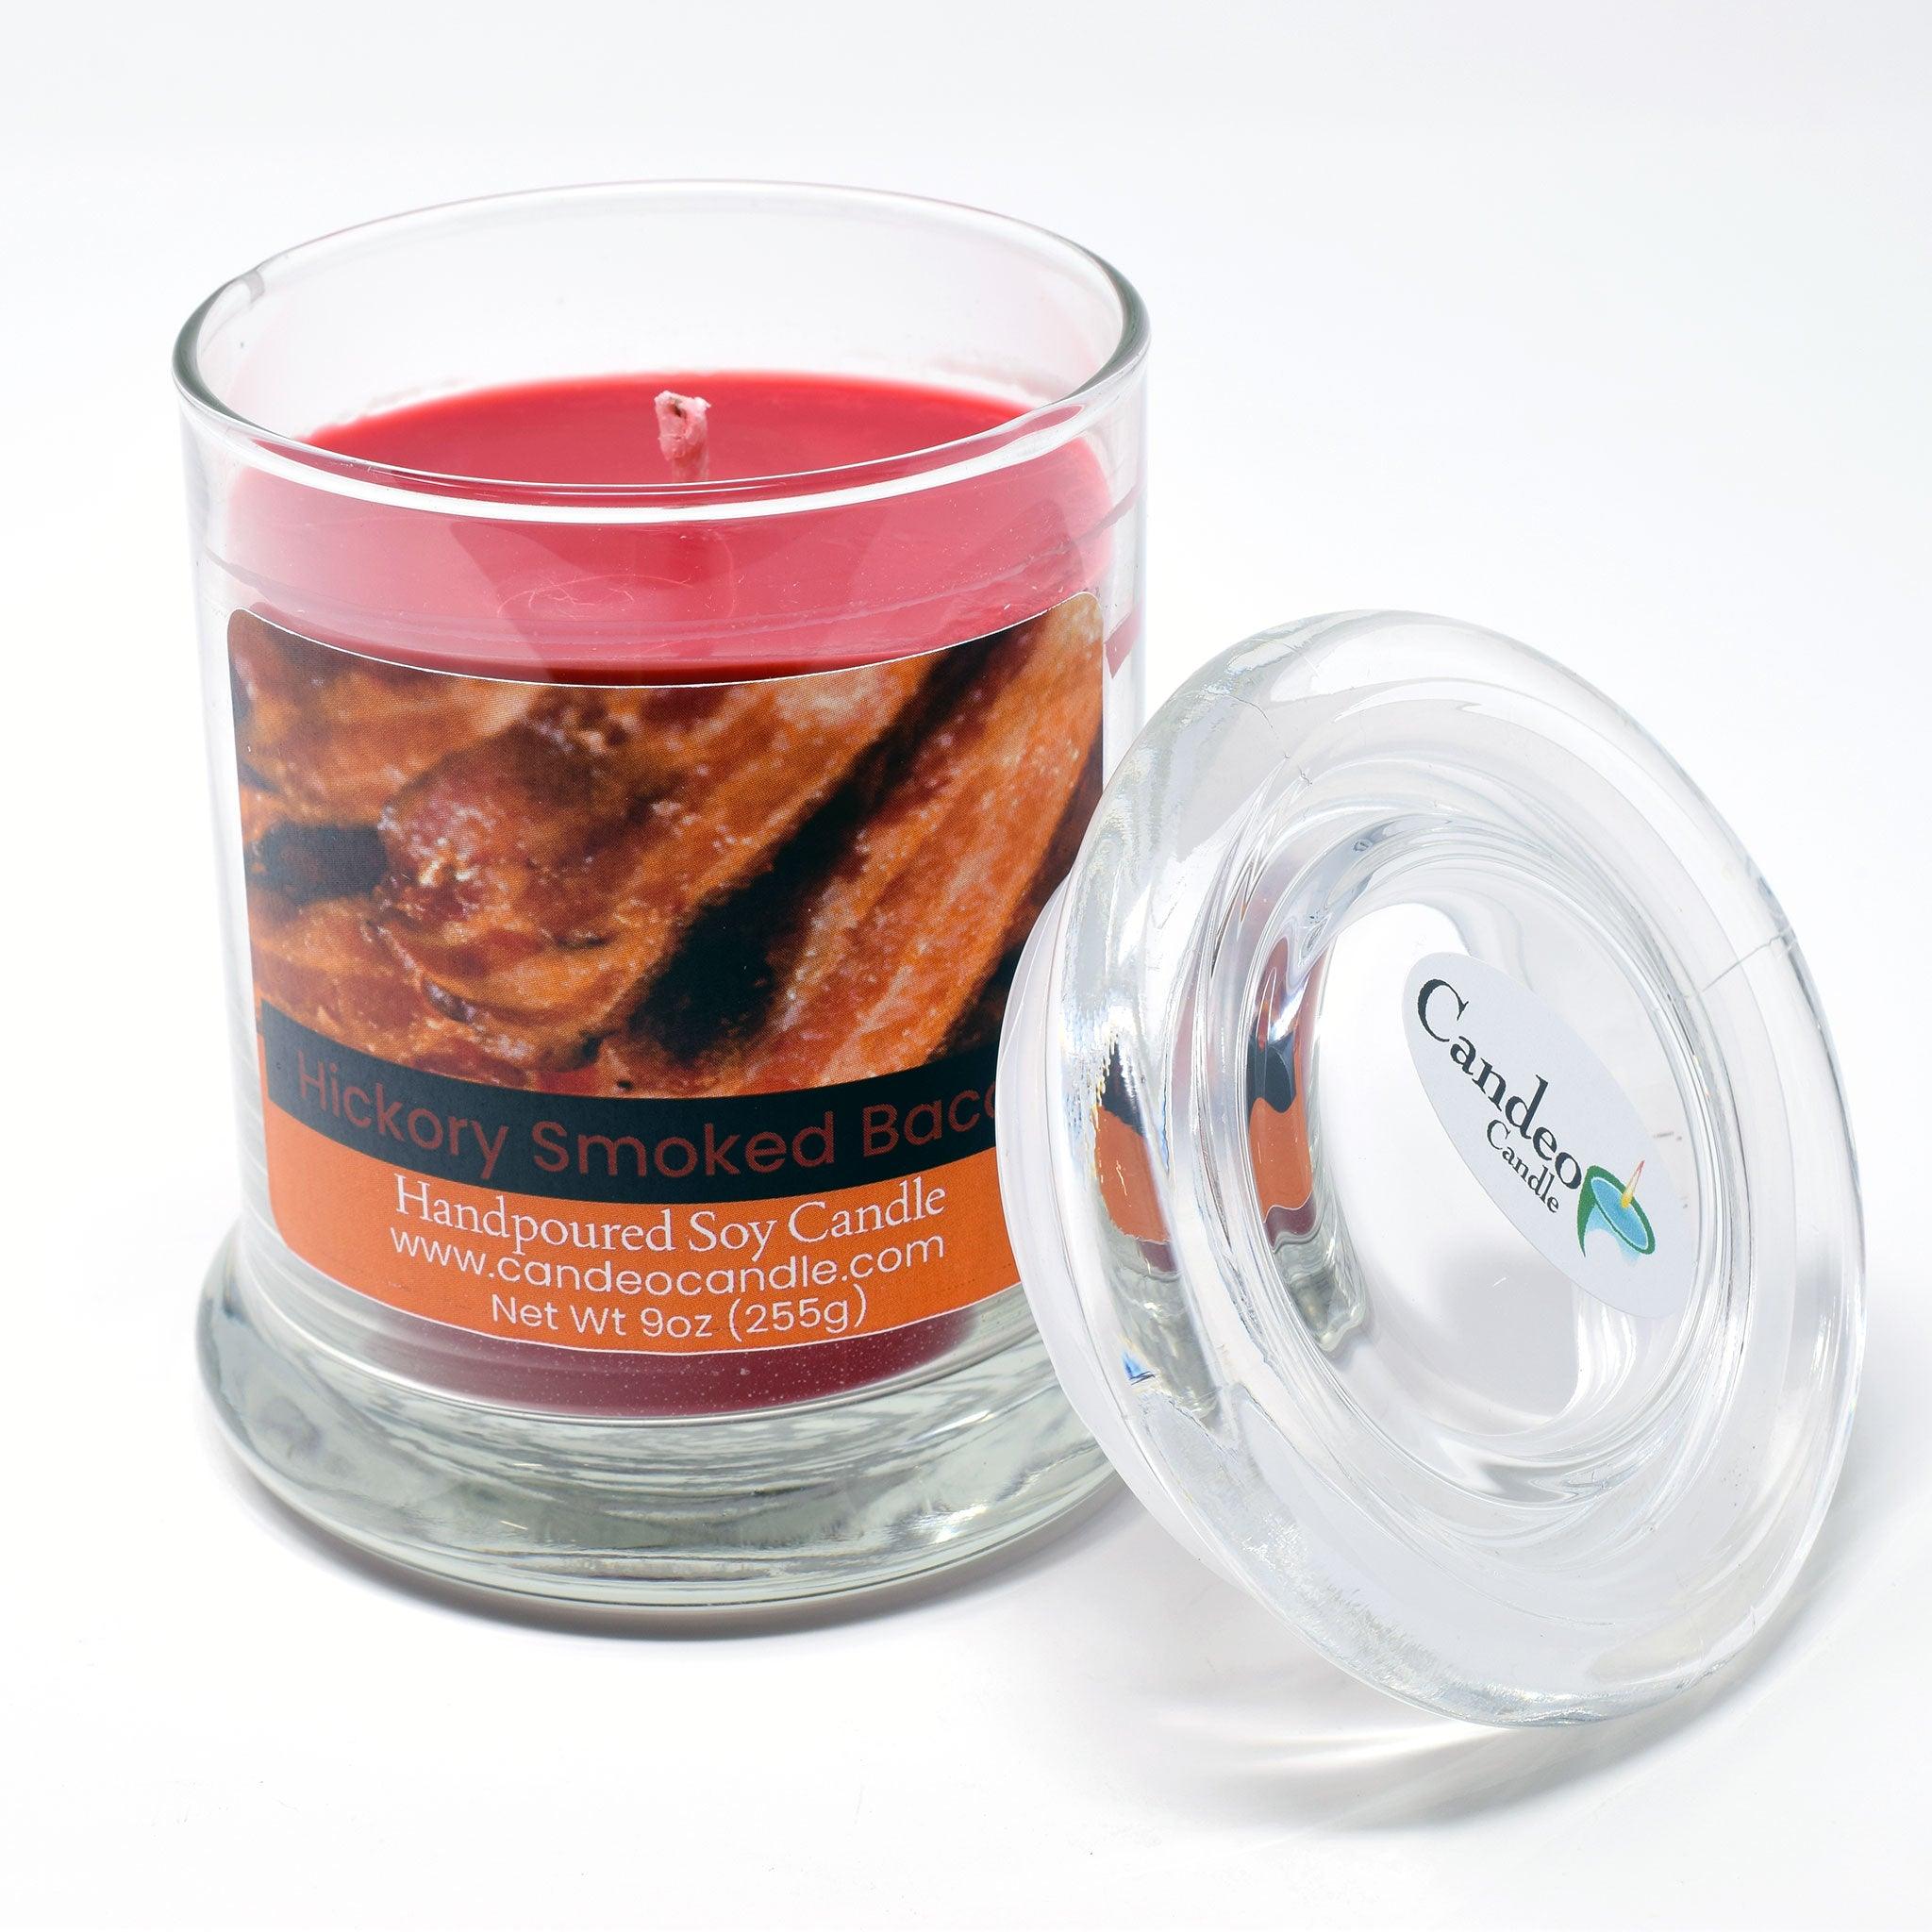 Hickory Smoked Bacon, 9oz Soy Candle Jar - Candeo Candle